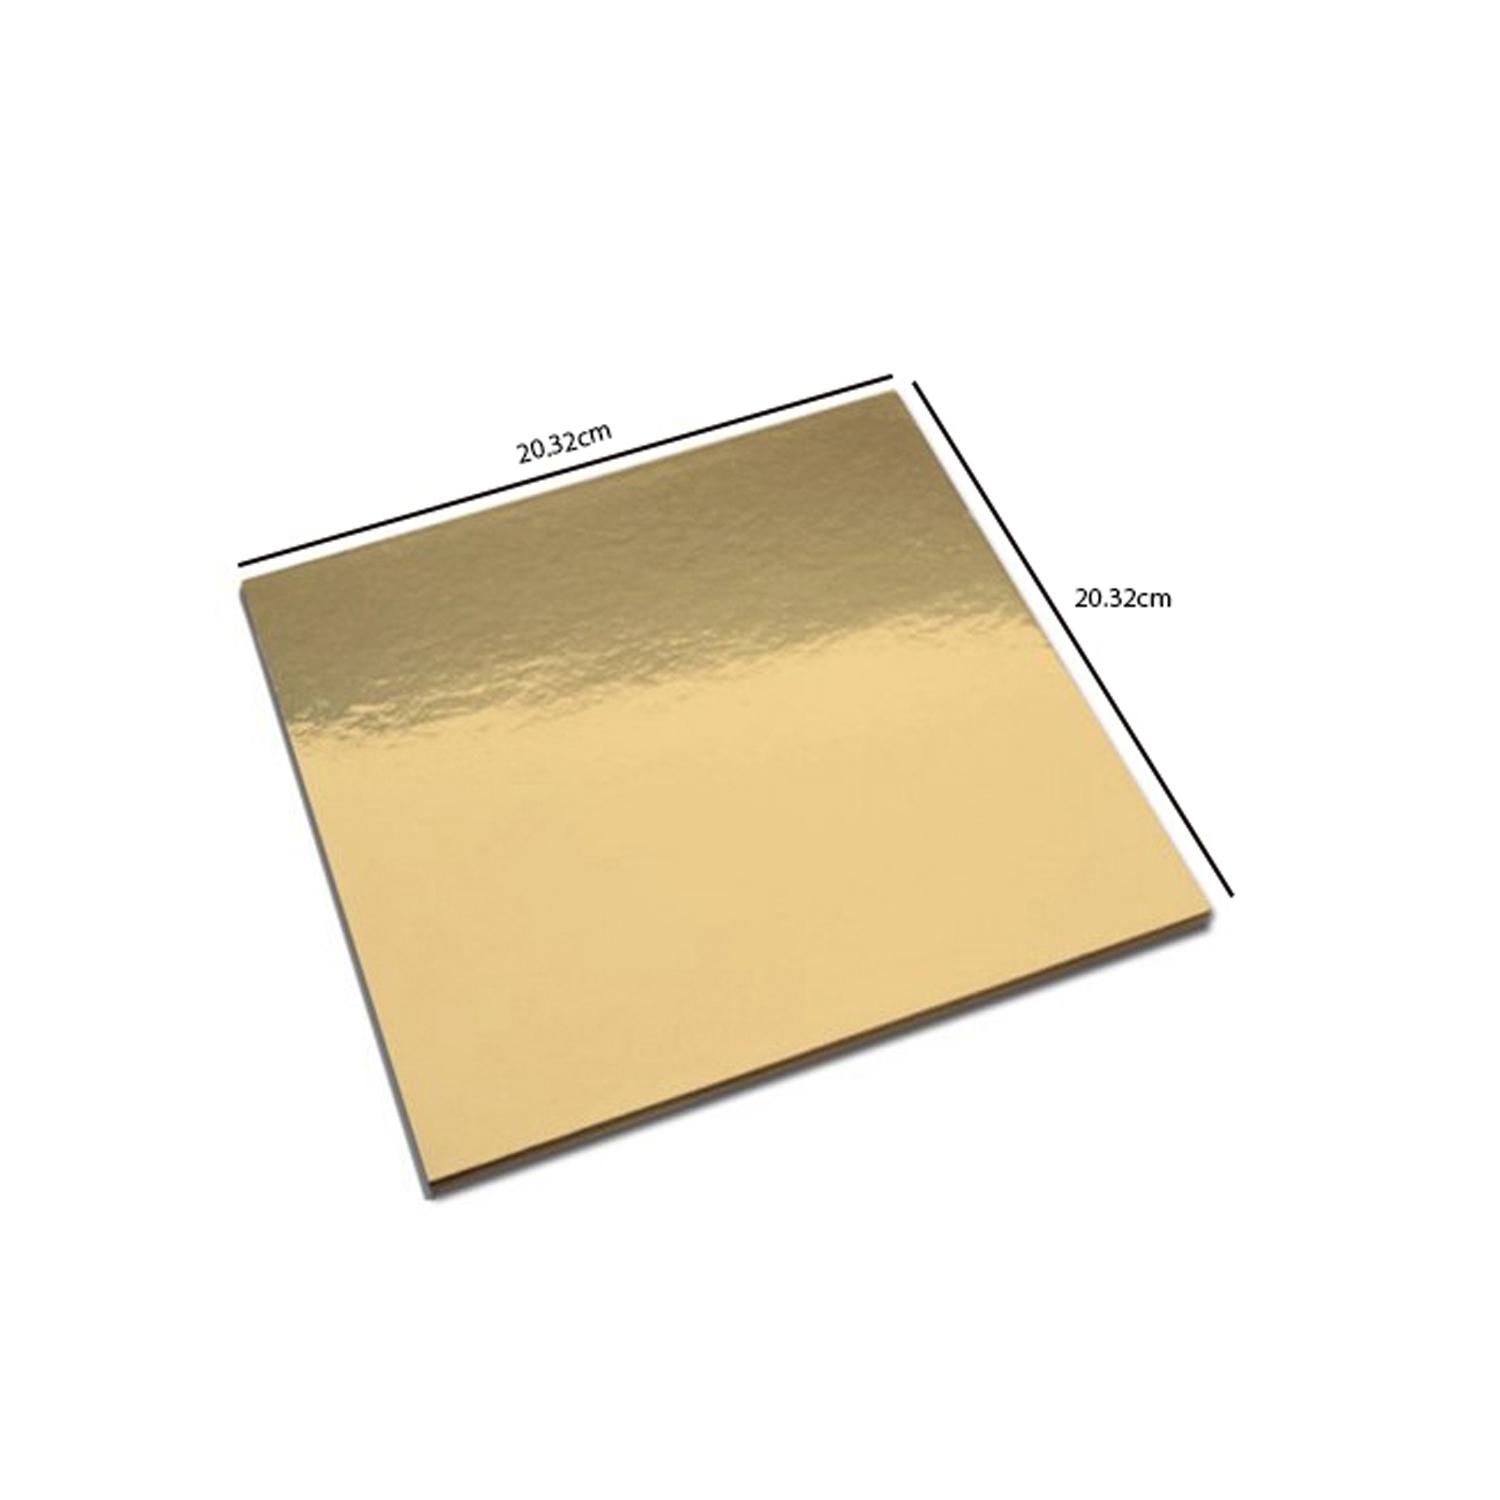 8'' SQUARE SMOOTH GOLD CAKE BOARD